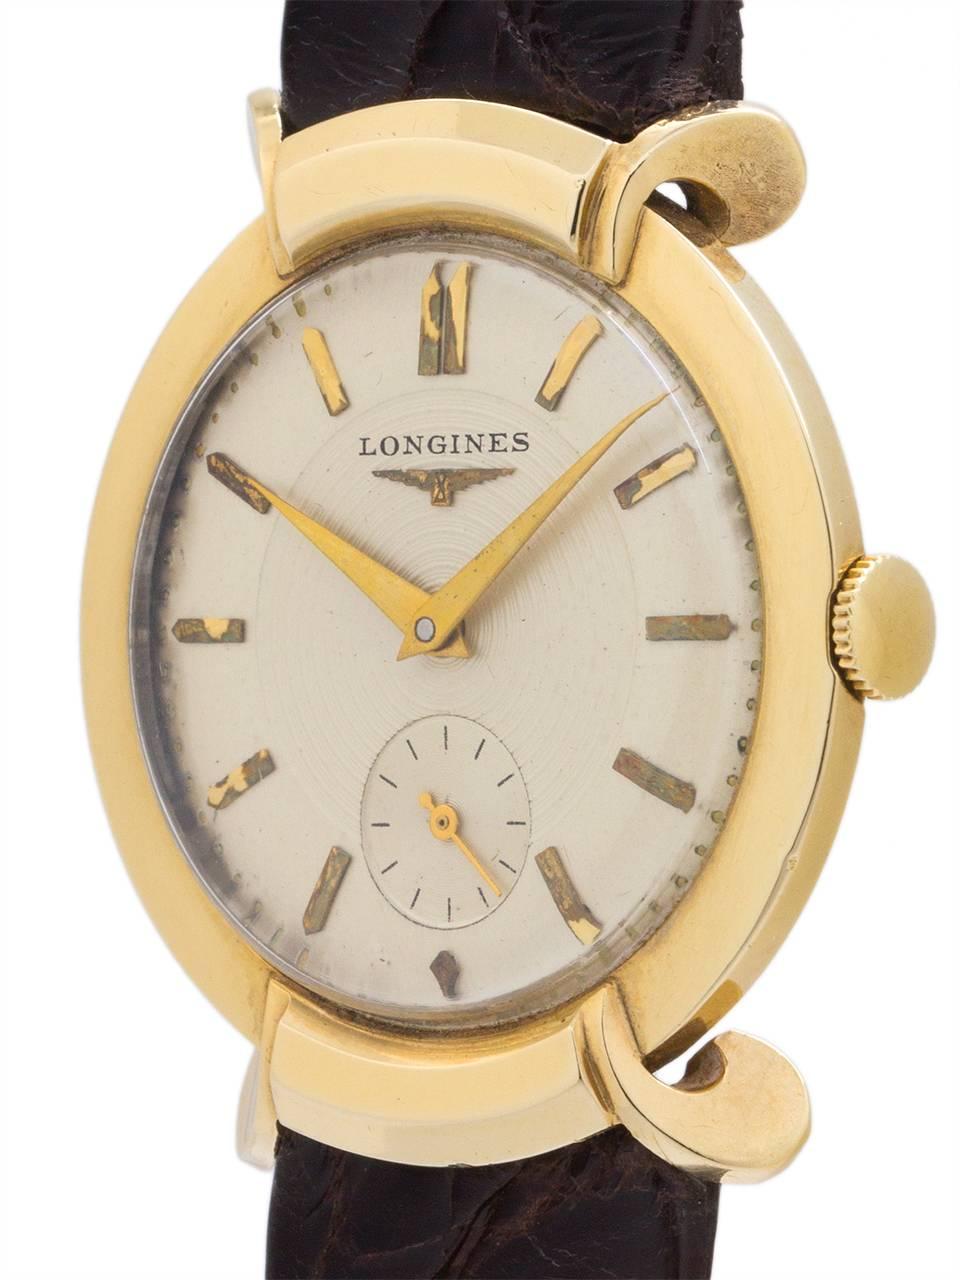 Longines 14K YG dress model so called “turtle” case with extended, beautifully curved lugs. Circa 1950’s. With very pleasing original 2 tone silvered satin dial with gold applied indexes and gold tapered hands. The outside of the dial is a smooth